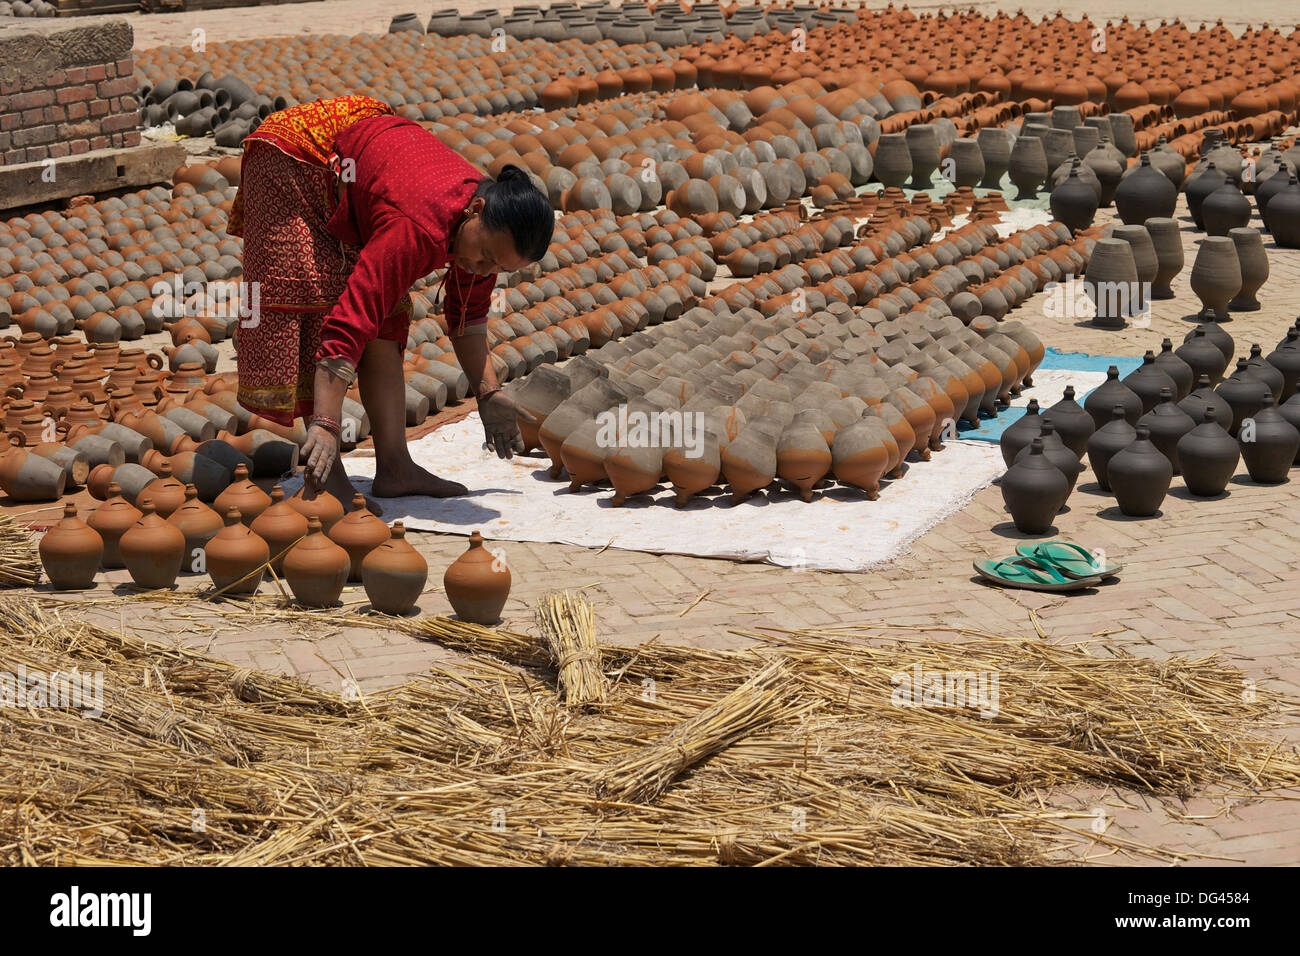 Woman turning pots to dry in sunshine, Potter's Square, Bhaktapur, Nepal, Asia Stock Photo